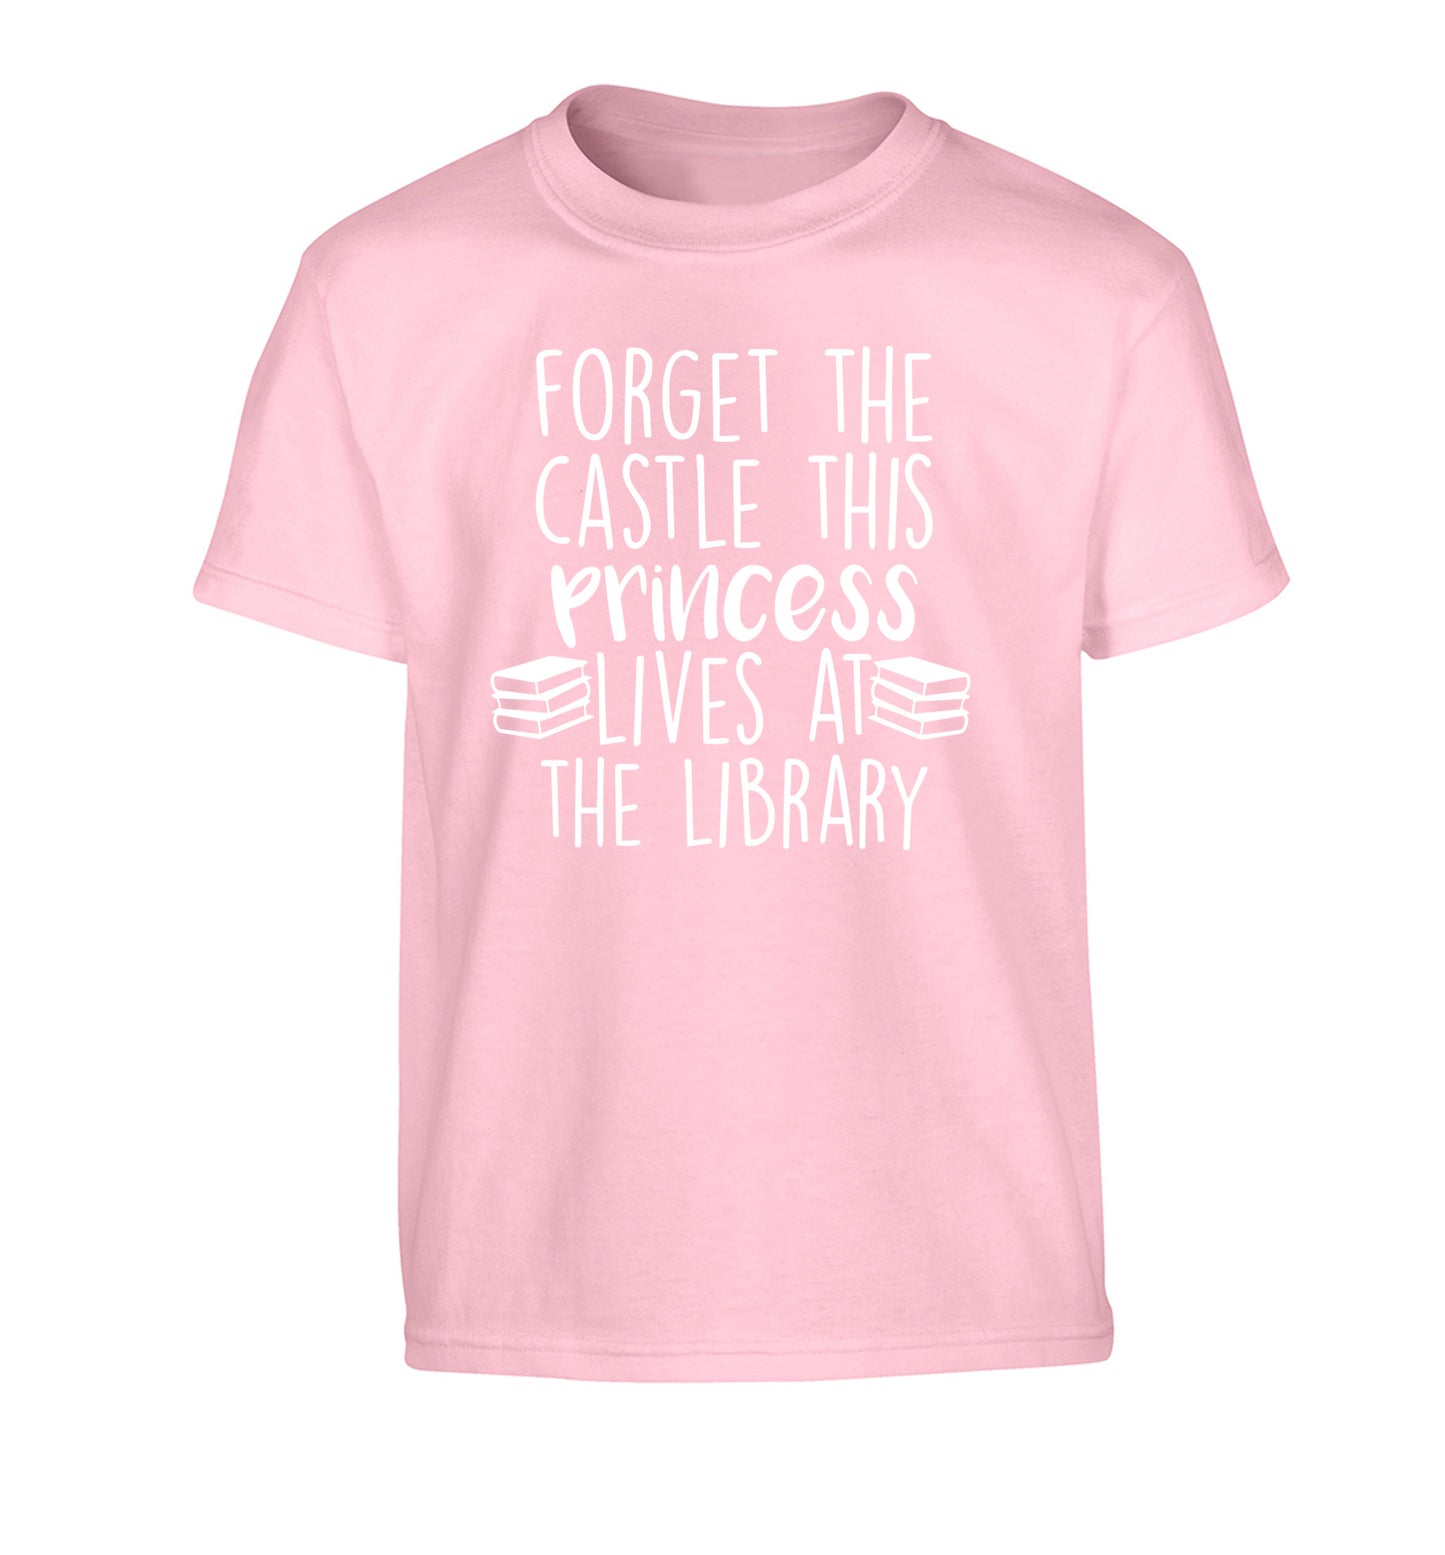 Forget the castle this princess lives at the library Children's light pink Tshirt 12-14 Years